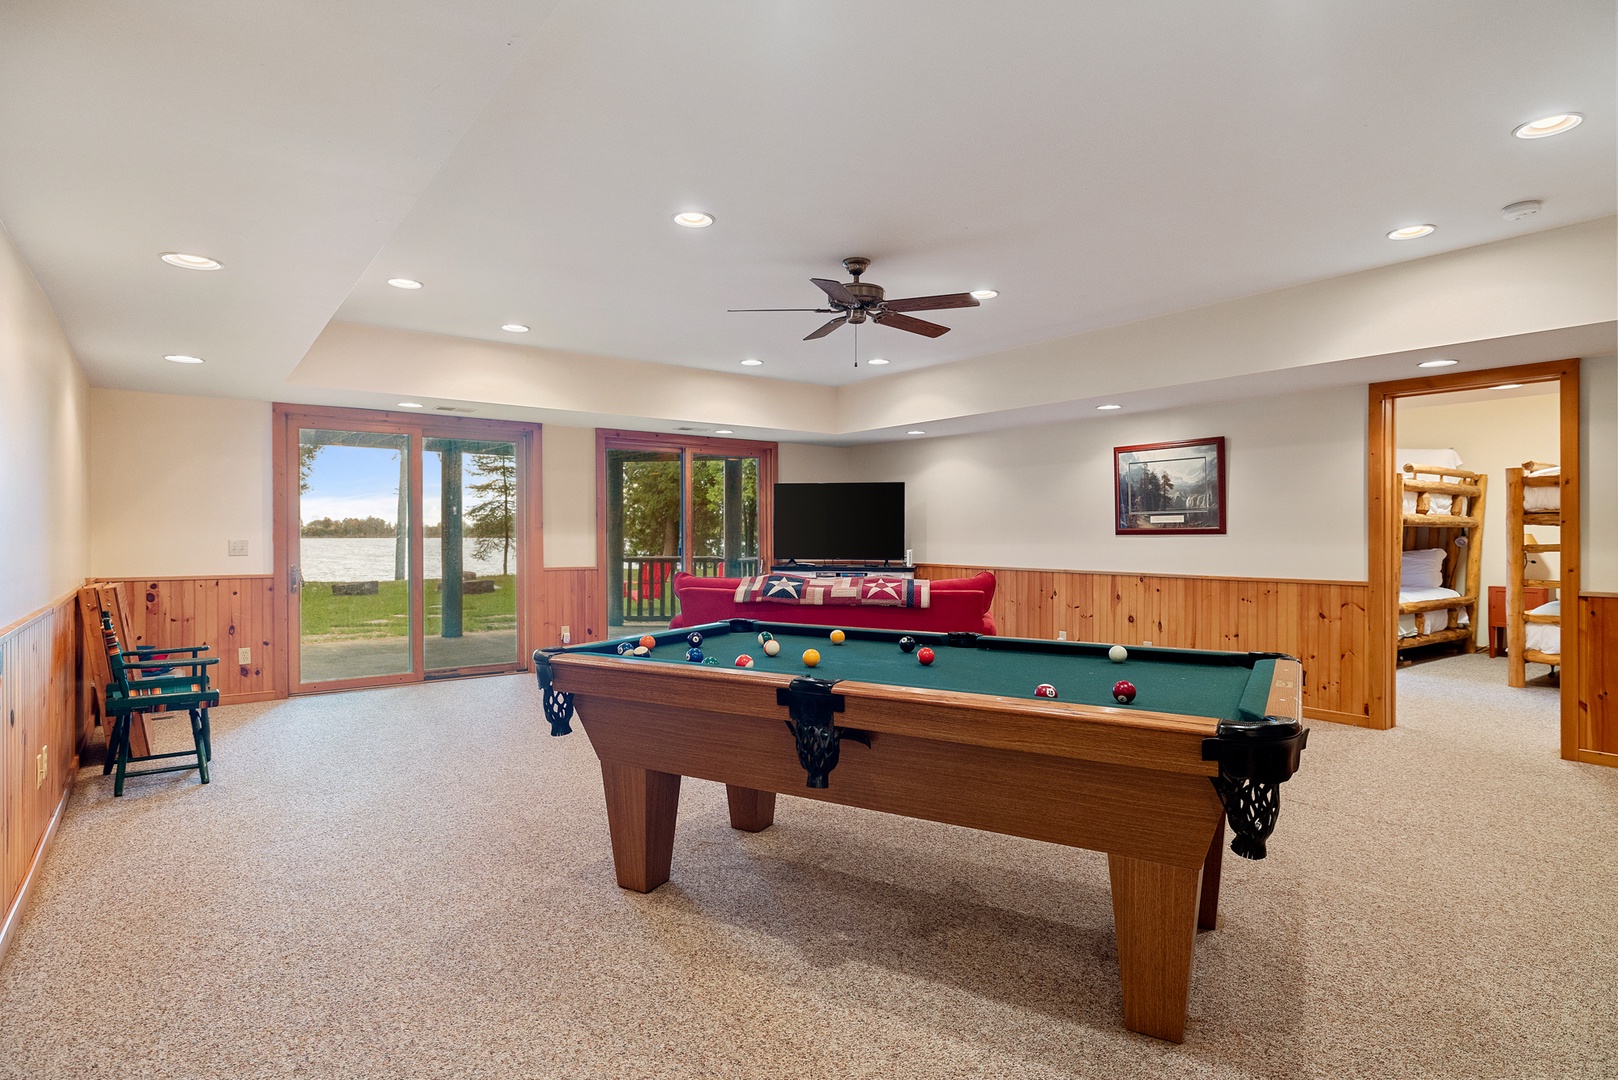 Get ready to have fun in the game room with tons of space for friendly competition.